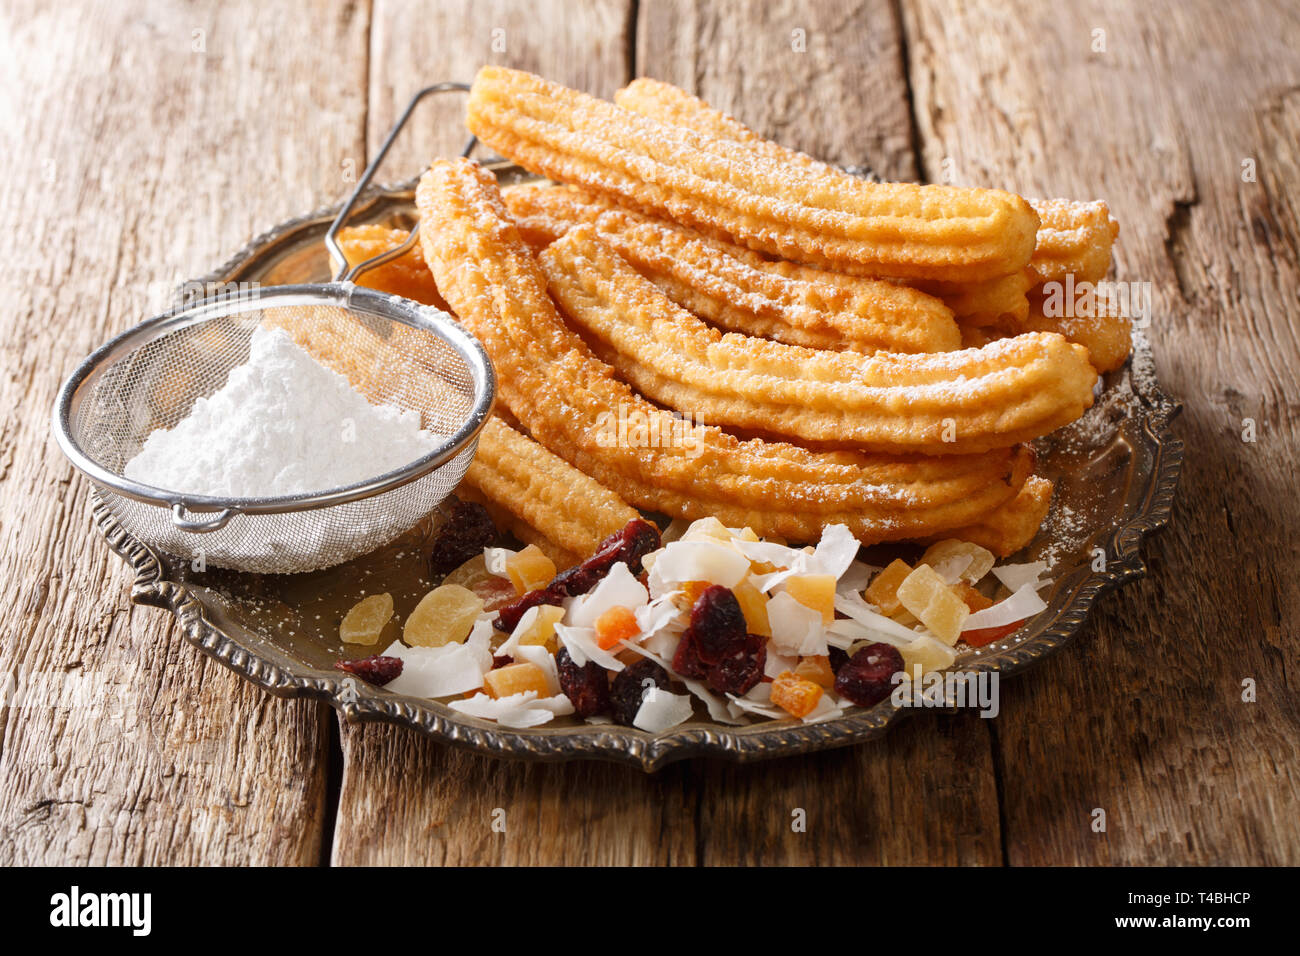 Churros are a fried pastry that are rolled in sugar and served with a candied fruit close-up on a plate on the table. horizontal Stock Photo